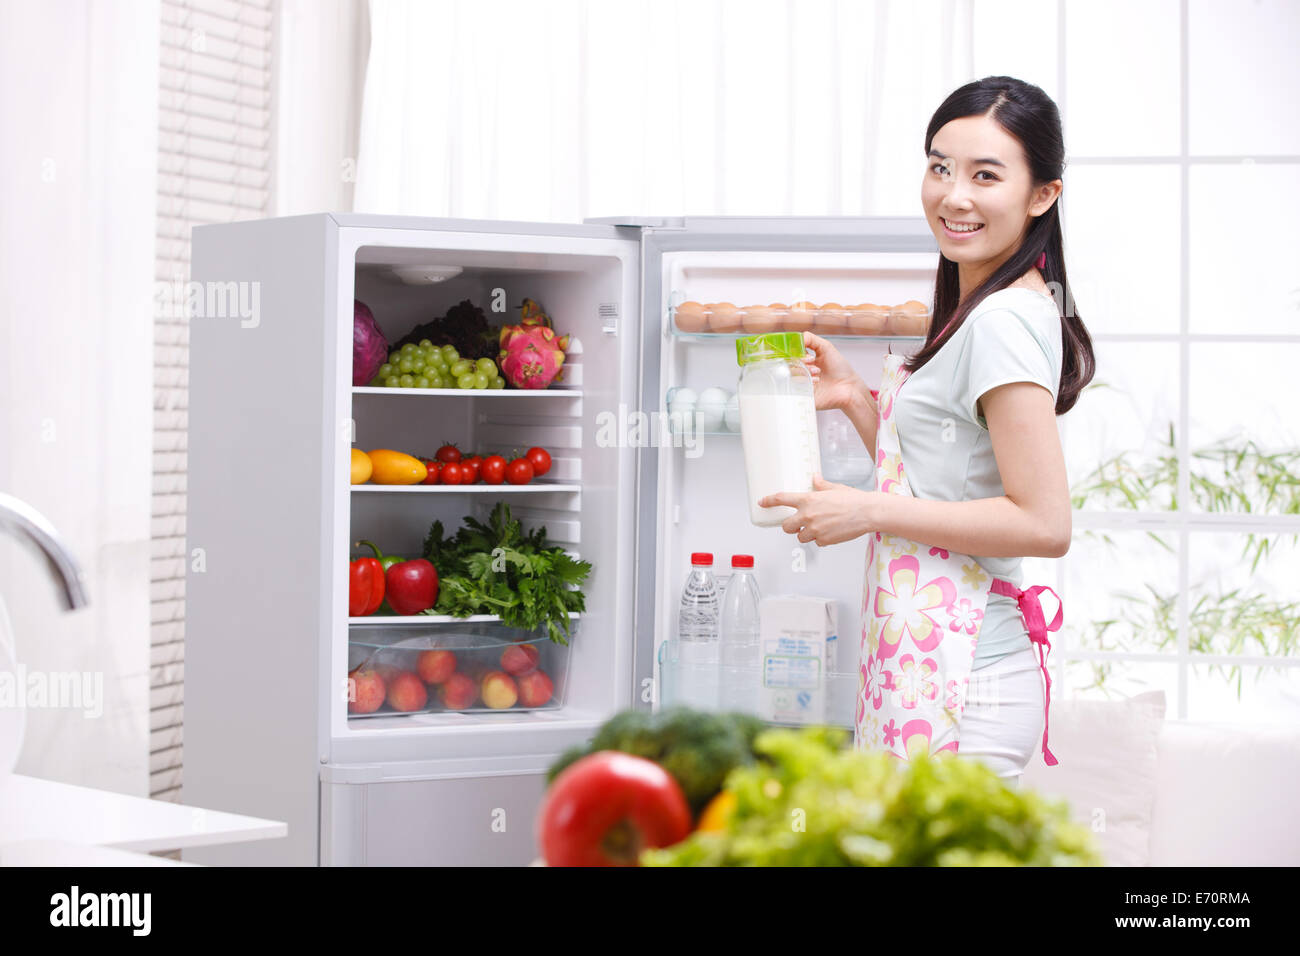 Milk in refrigerator stock photo. Image of container - 11894526